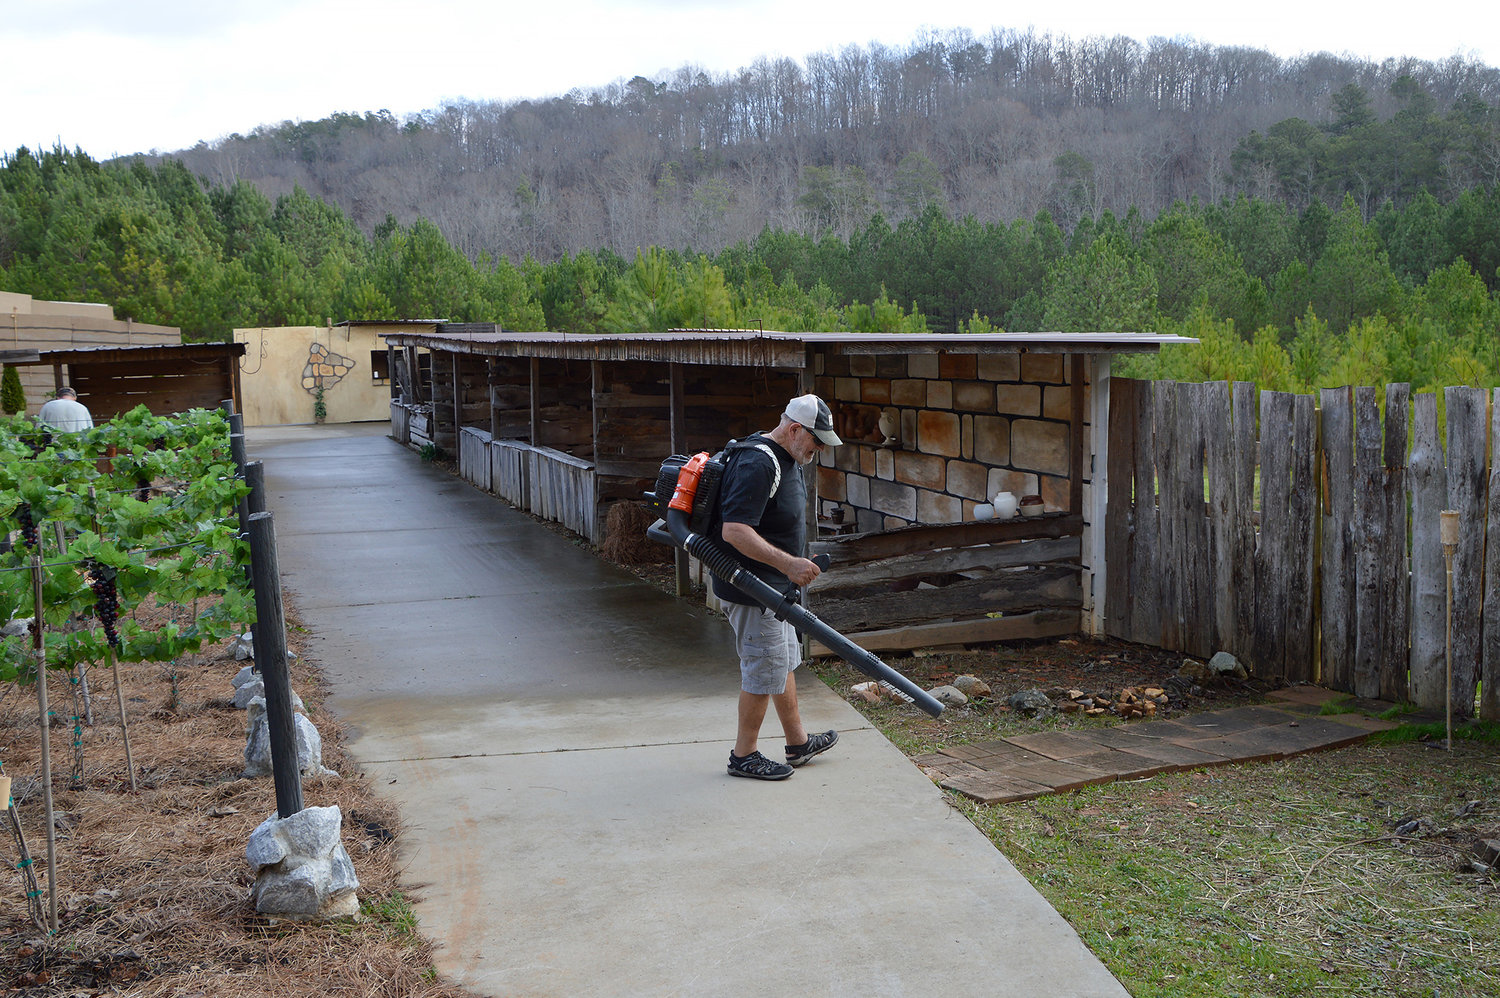 Jim Yearwood blows leaves from the Bethlehem village set on the grounds of Legacy Baptist Church in Dallas, Ga., Thursday, Dec. 8, 2022, as final preparations are made for the Legacy of Bethlehem production. (Index/Henry Durand)